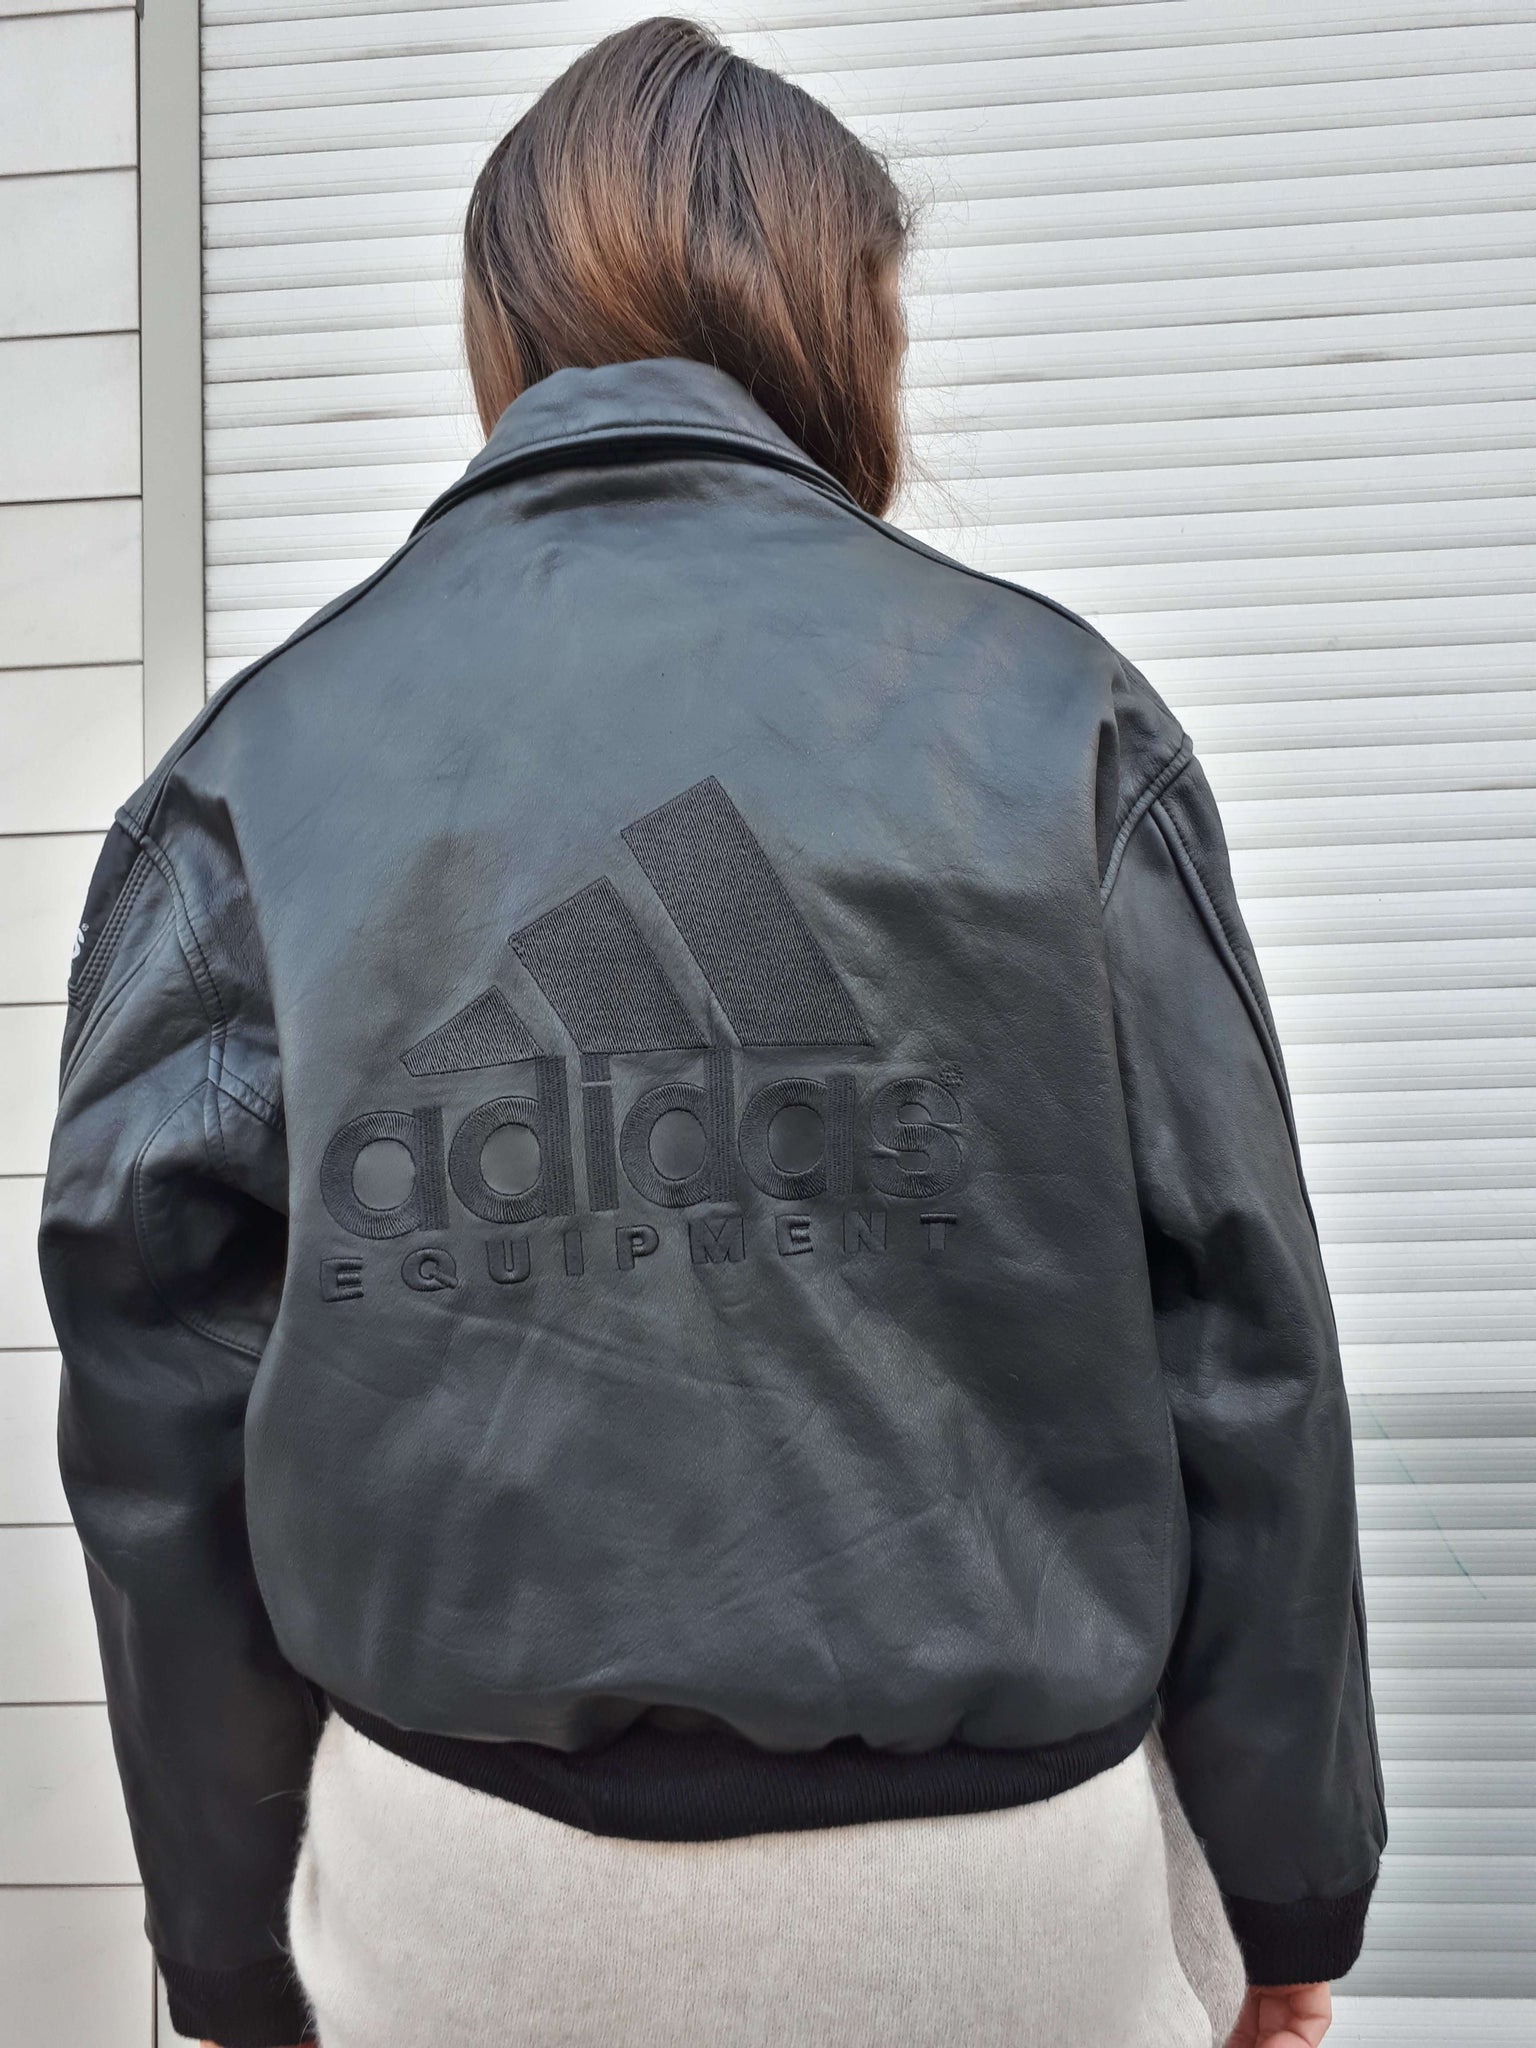 90s ADIDAS EQUIPMENT LEATHER JACKET | M – Past out